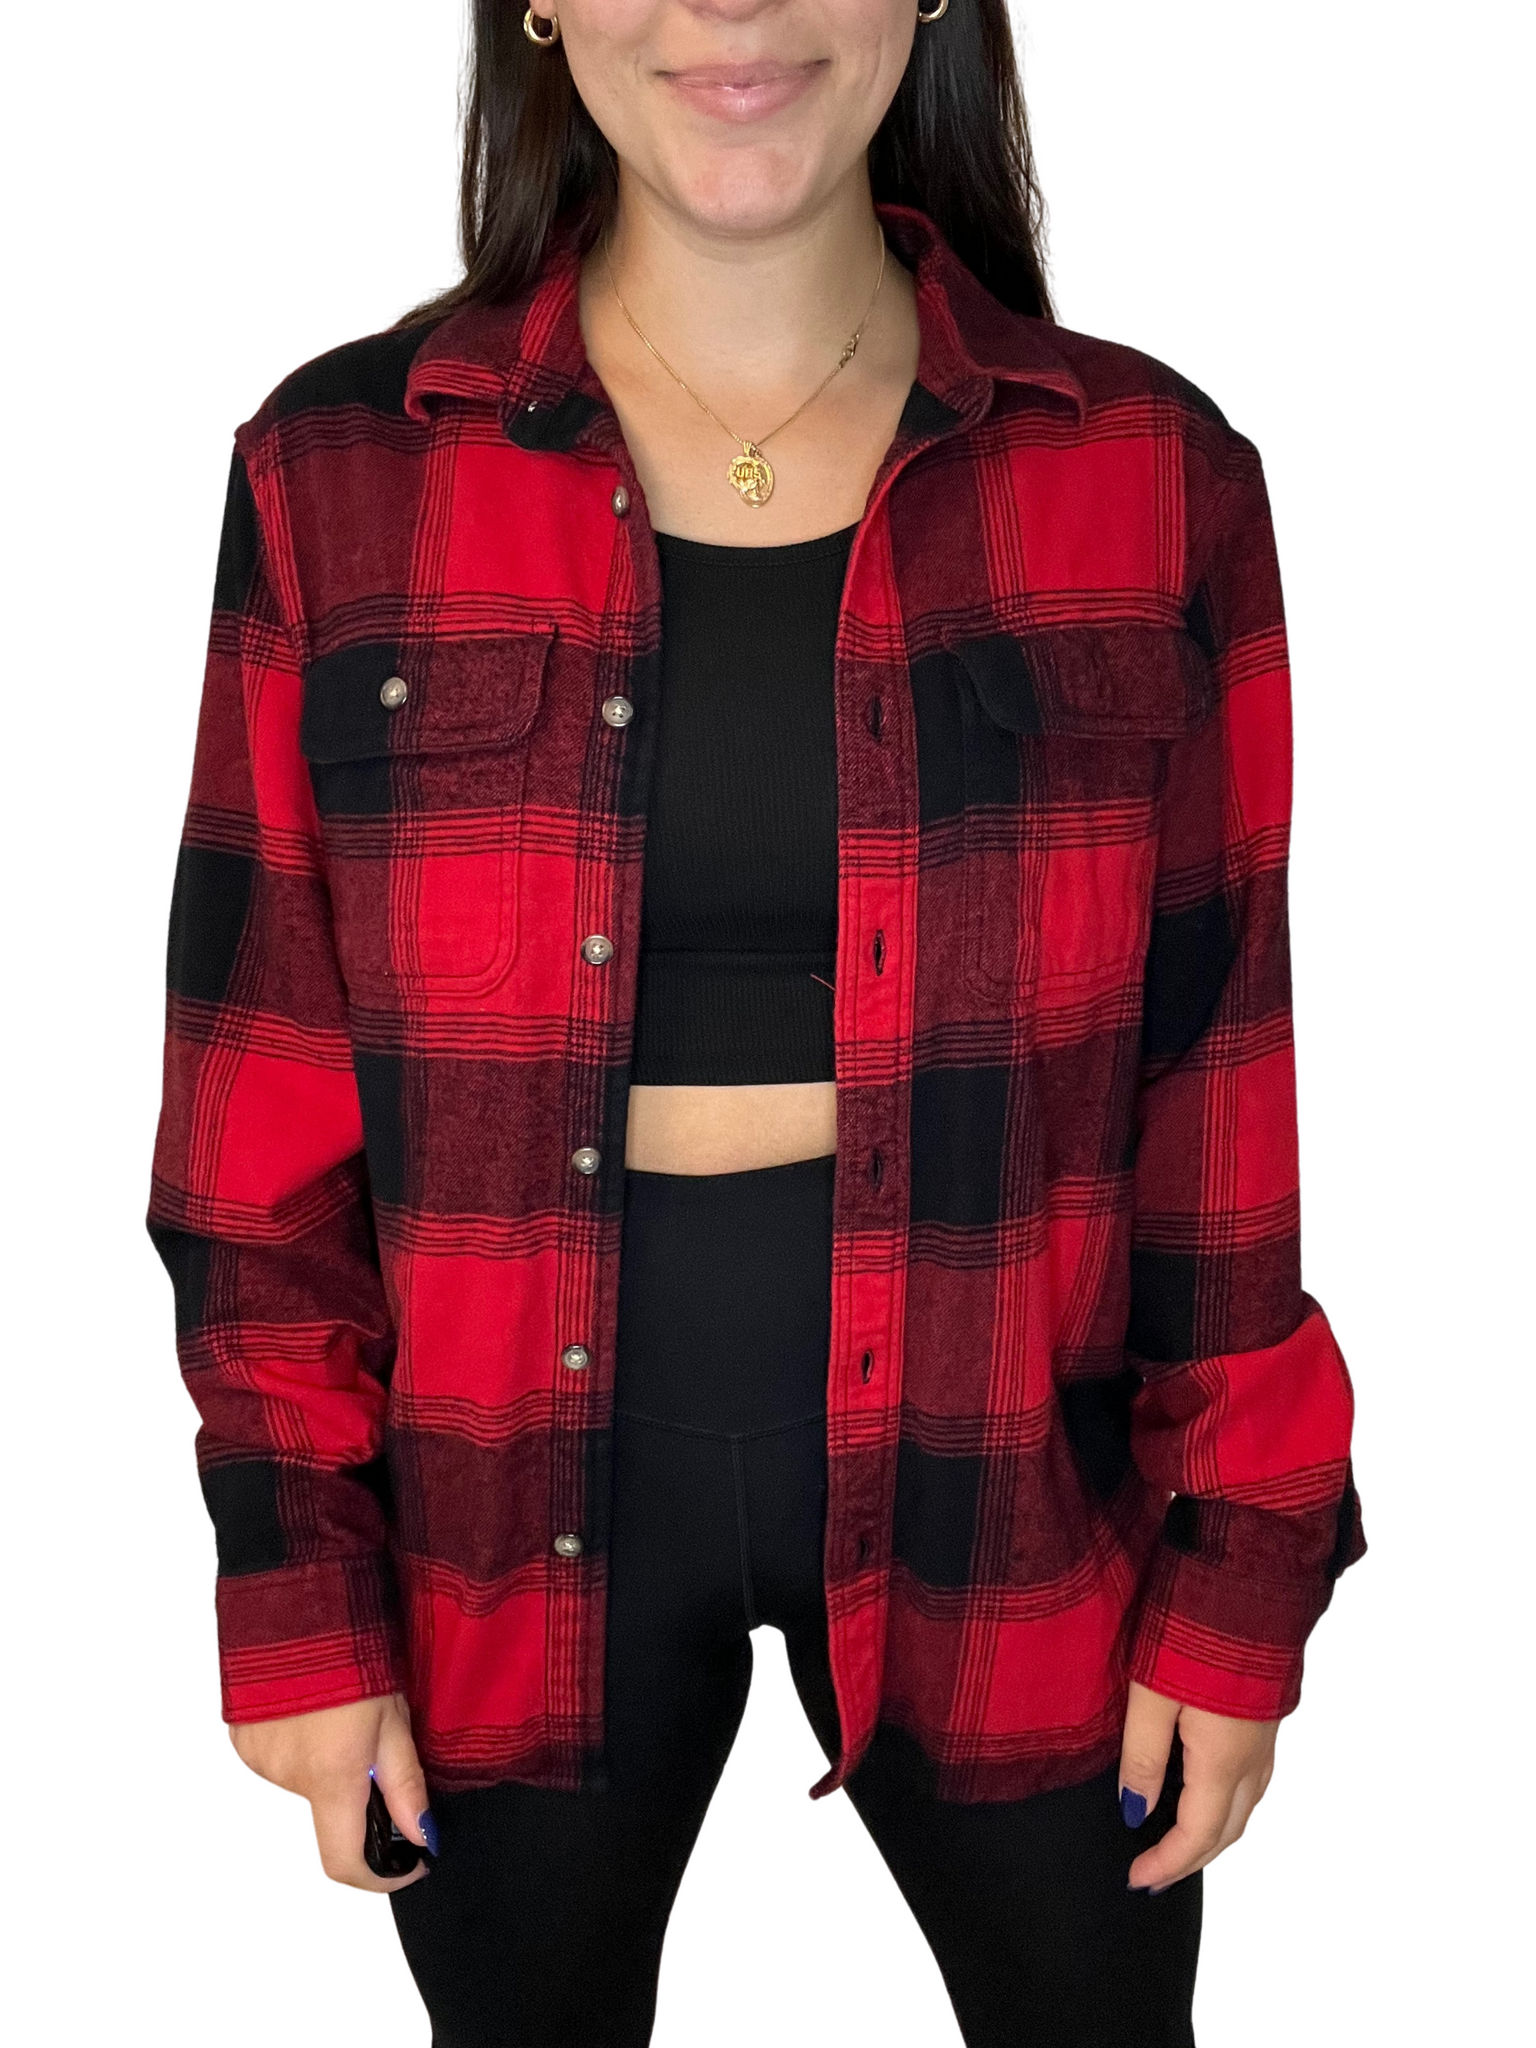 colts flannel shirt